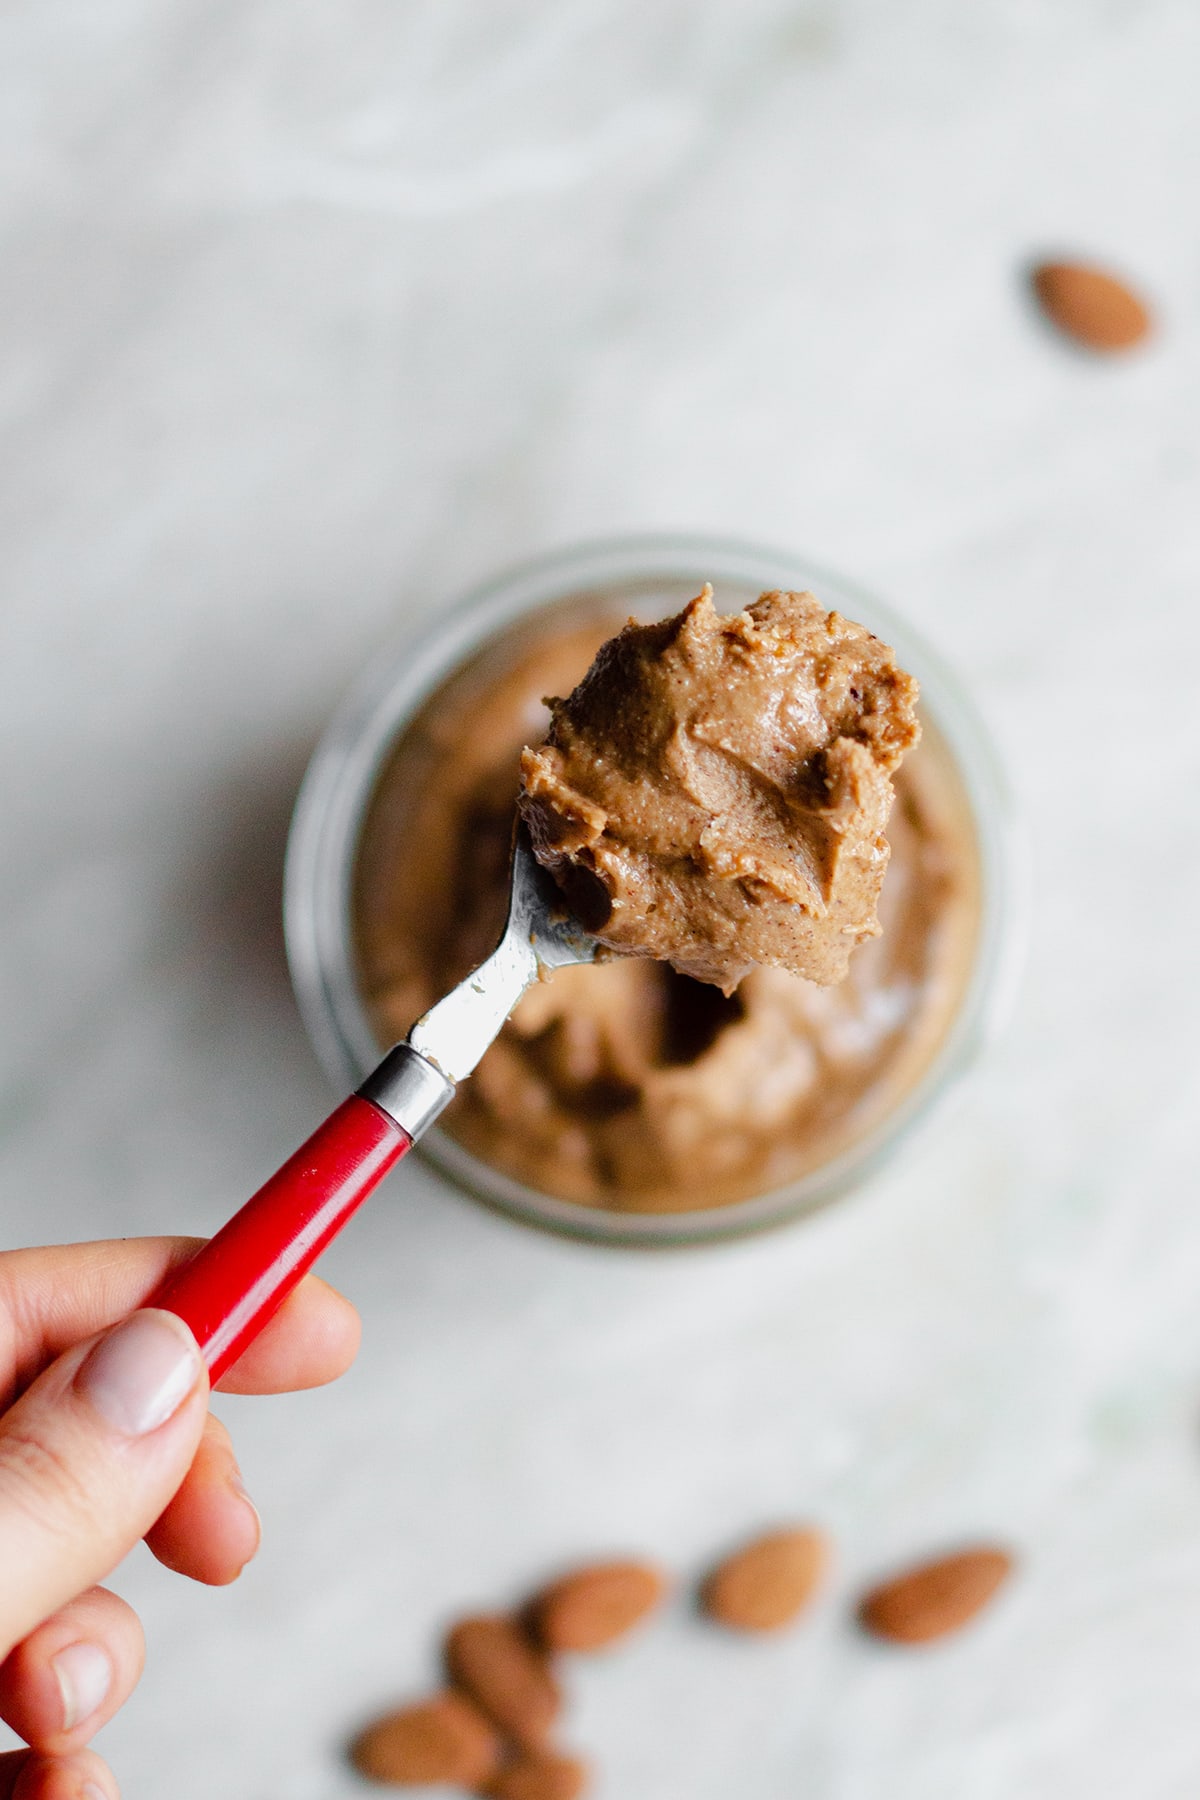 Salted Caramel Nut Butter in a glass jar with a red spoon holding a spoonful.